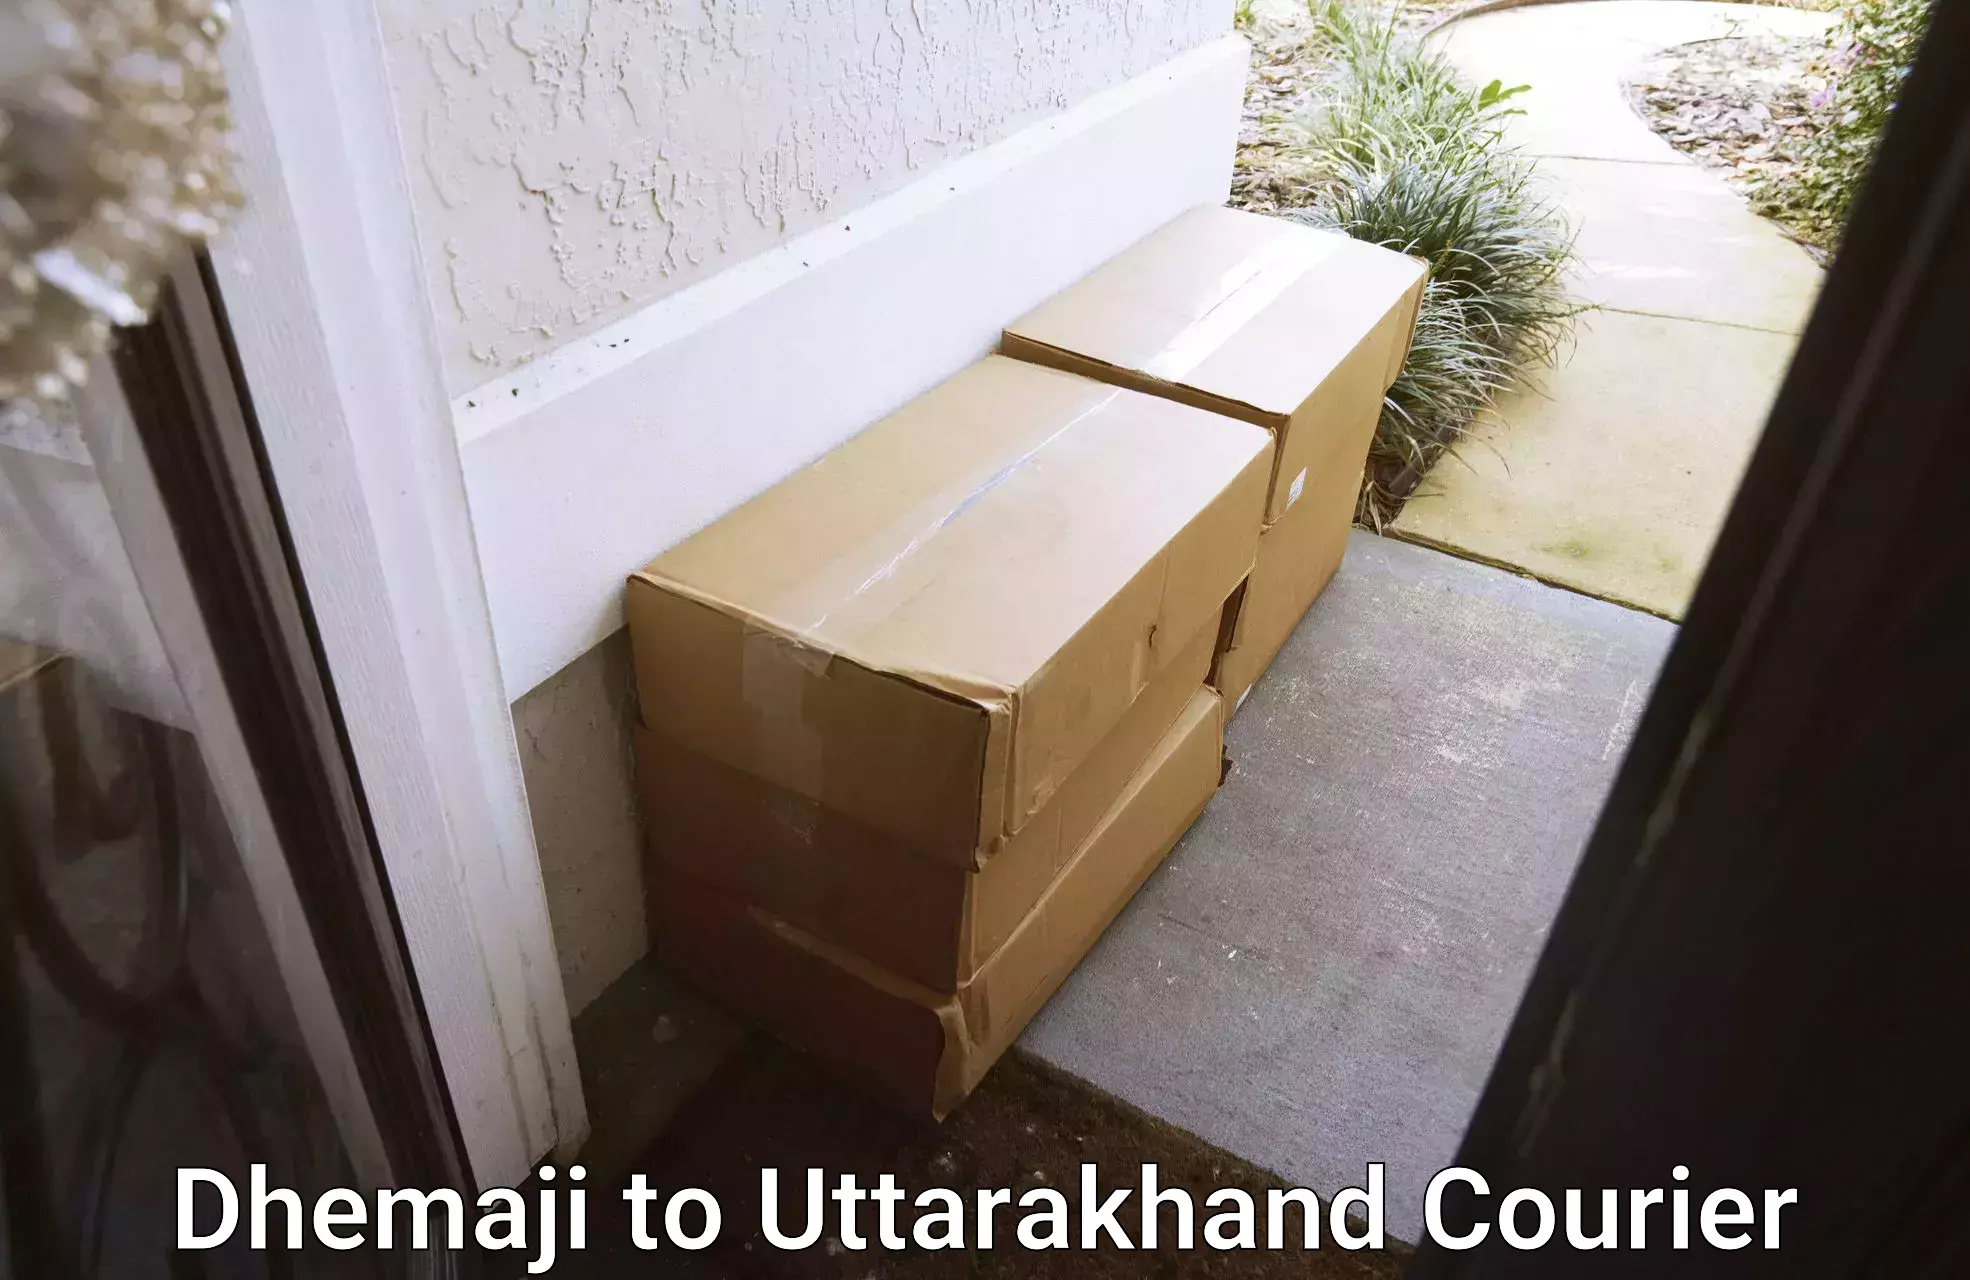 Overnight delivery services Dhemaji to Uttarakhand